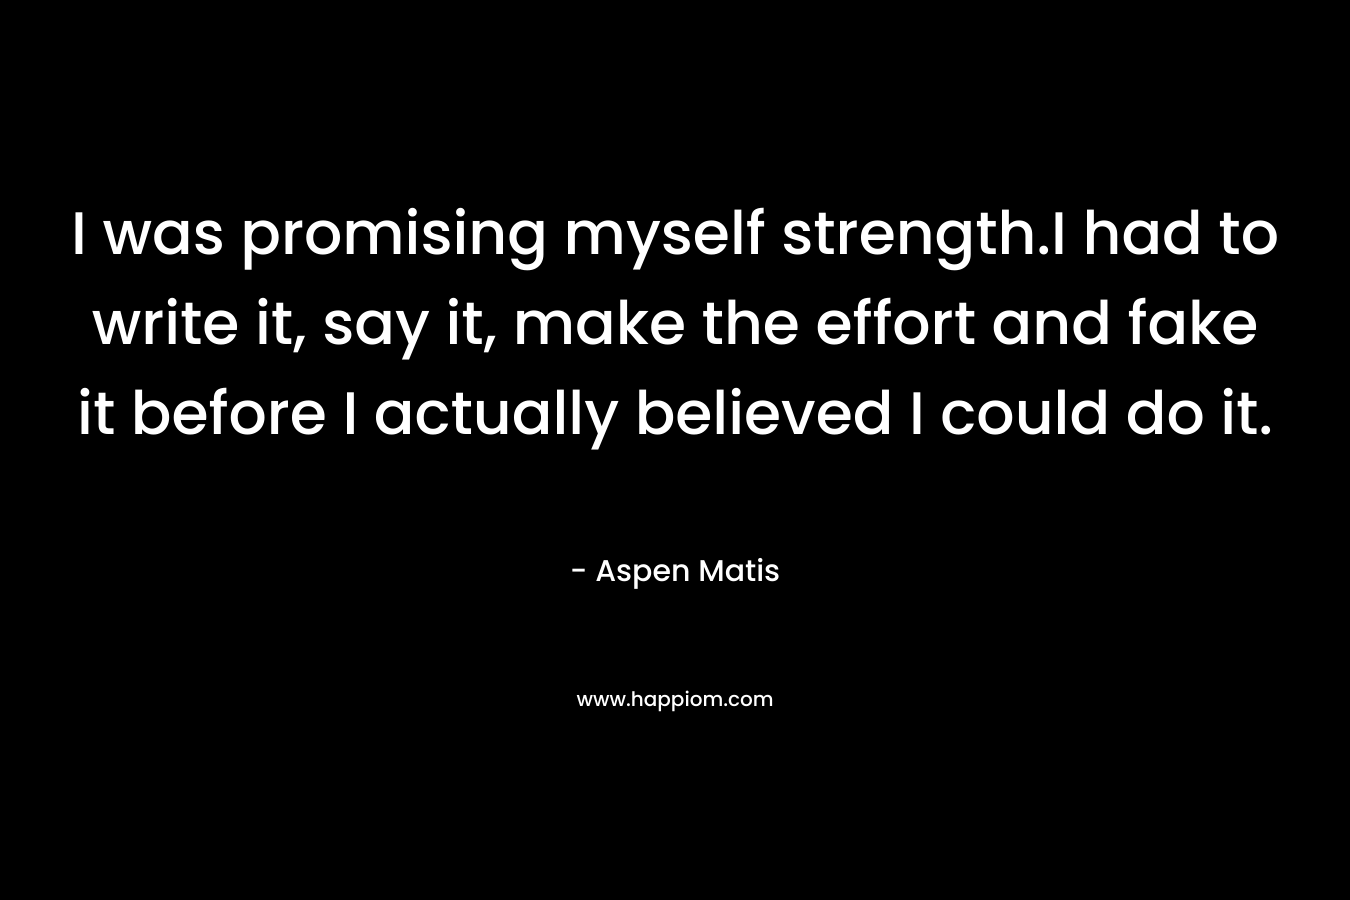 I was promising myself strength.I had to write it, say it, make the effort and fake it before I actually believed I could do it. – Aspen Matis